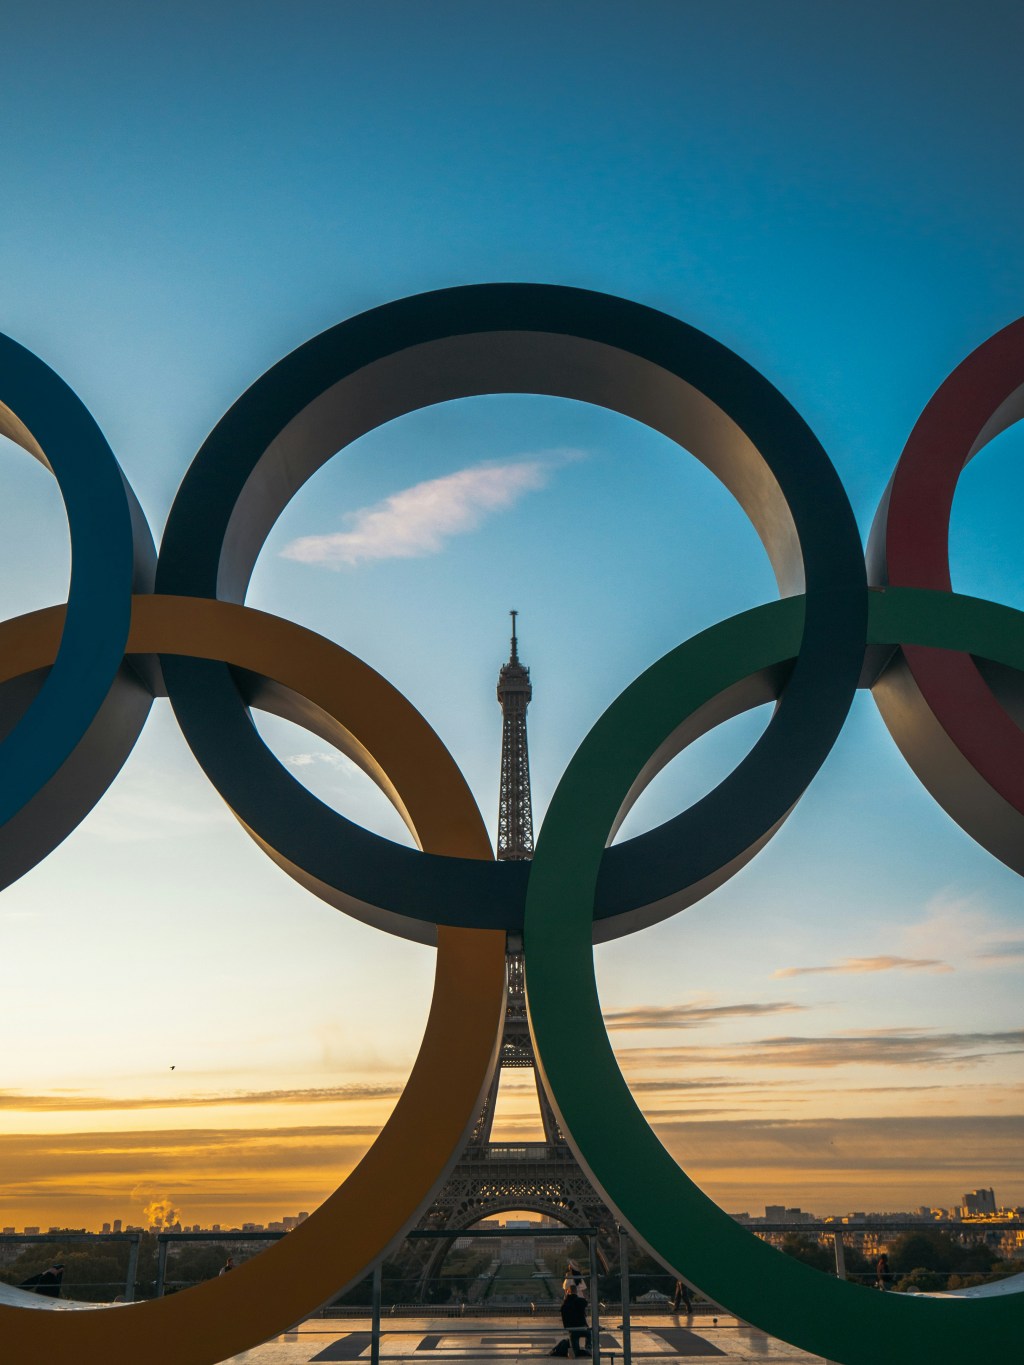 Olympic rings with the Eiffel Tower in the distance